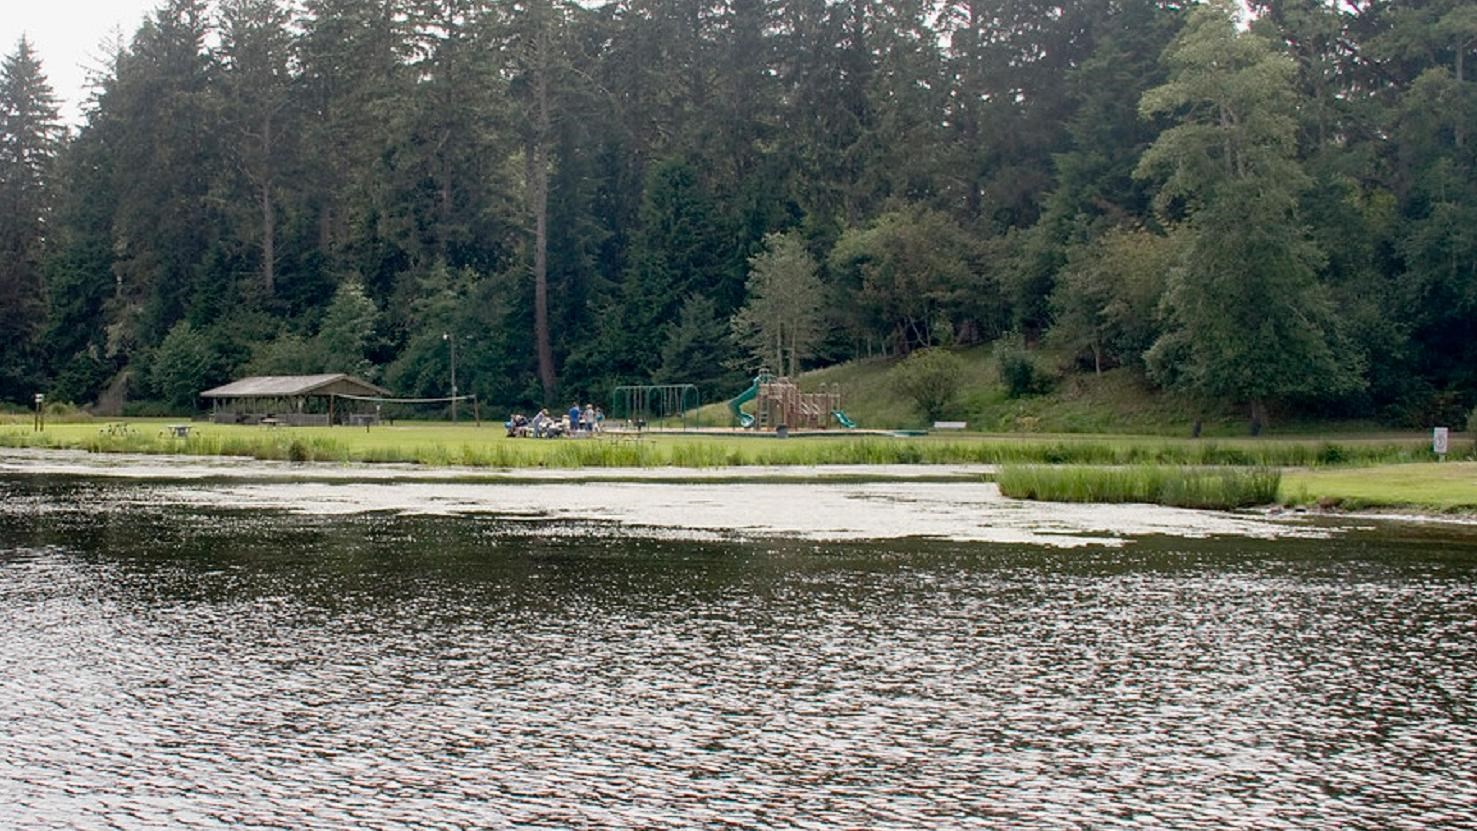 Families play in the playground along the shore of Cullaby Lake backdropped by forest